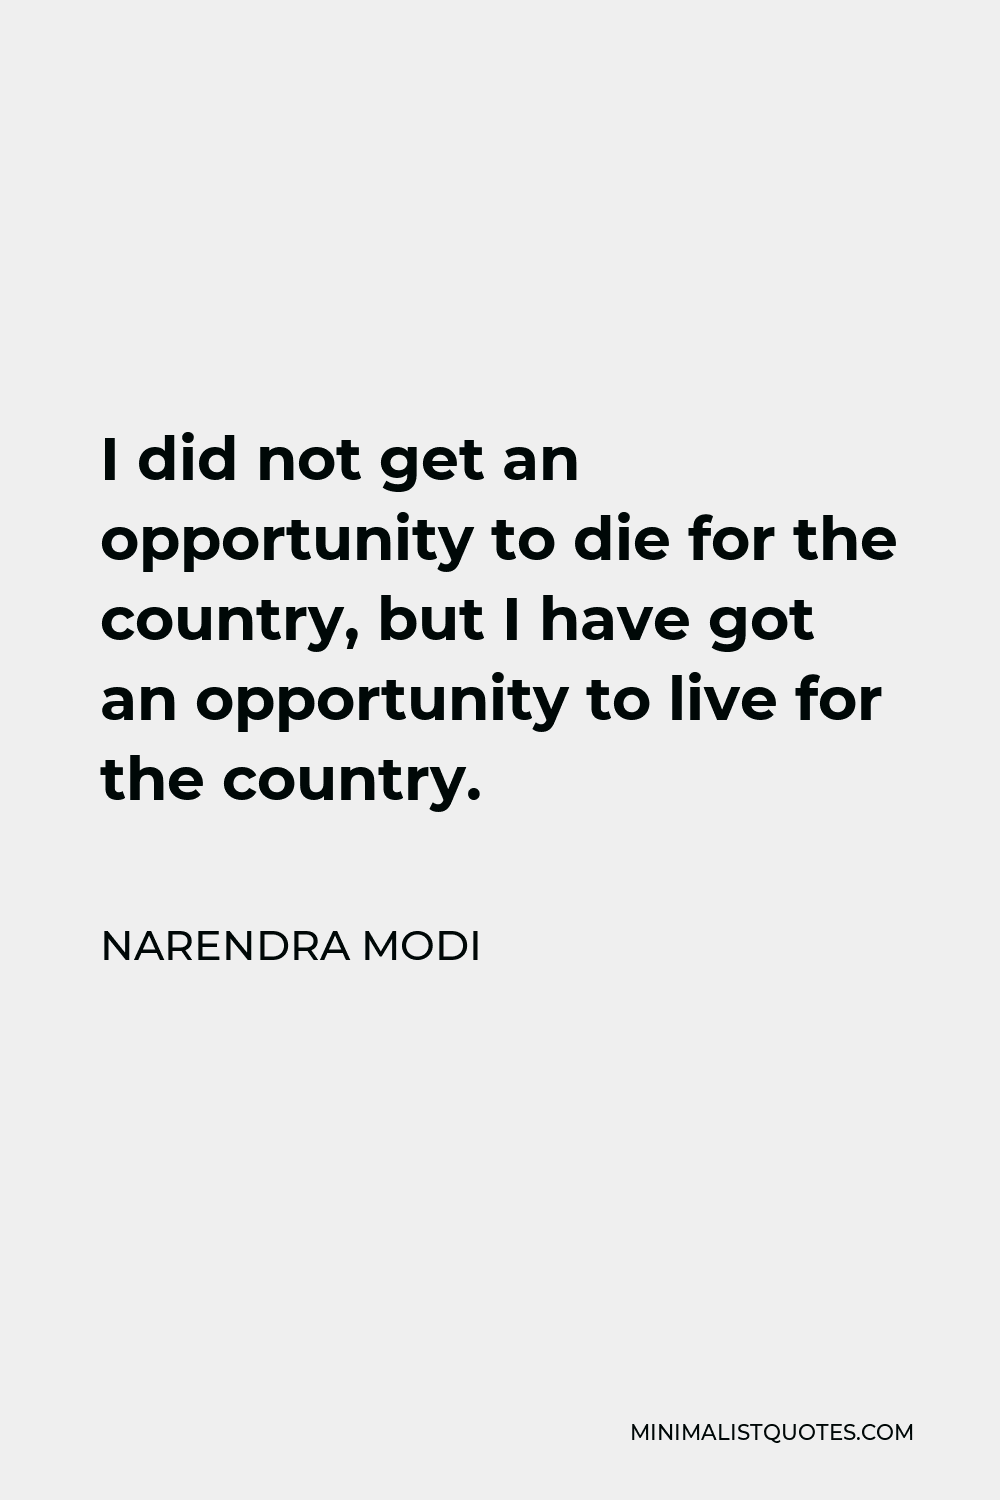 Narendra Modi Quote - I did not get an opportunity to die for the country, but I have got an opportunity to live for the country.